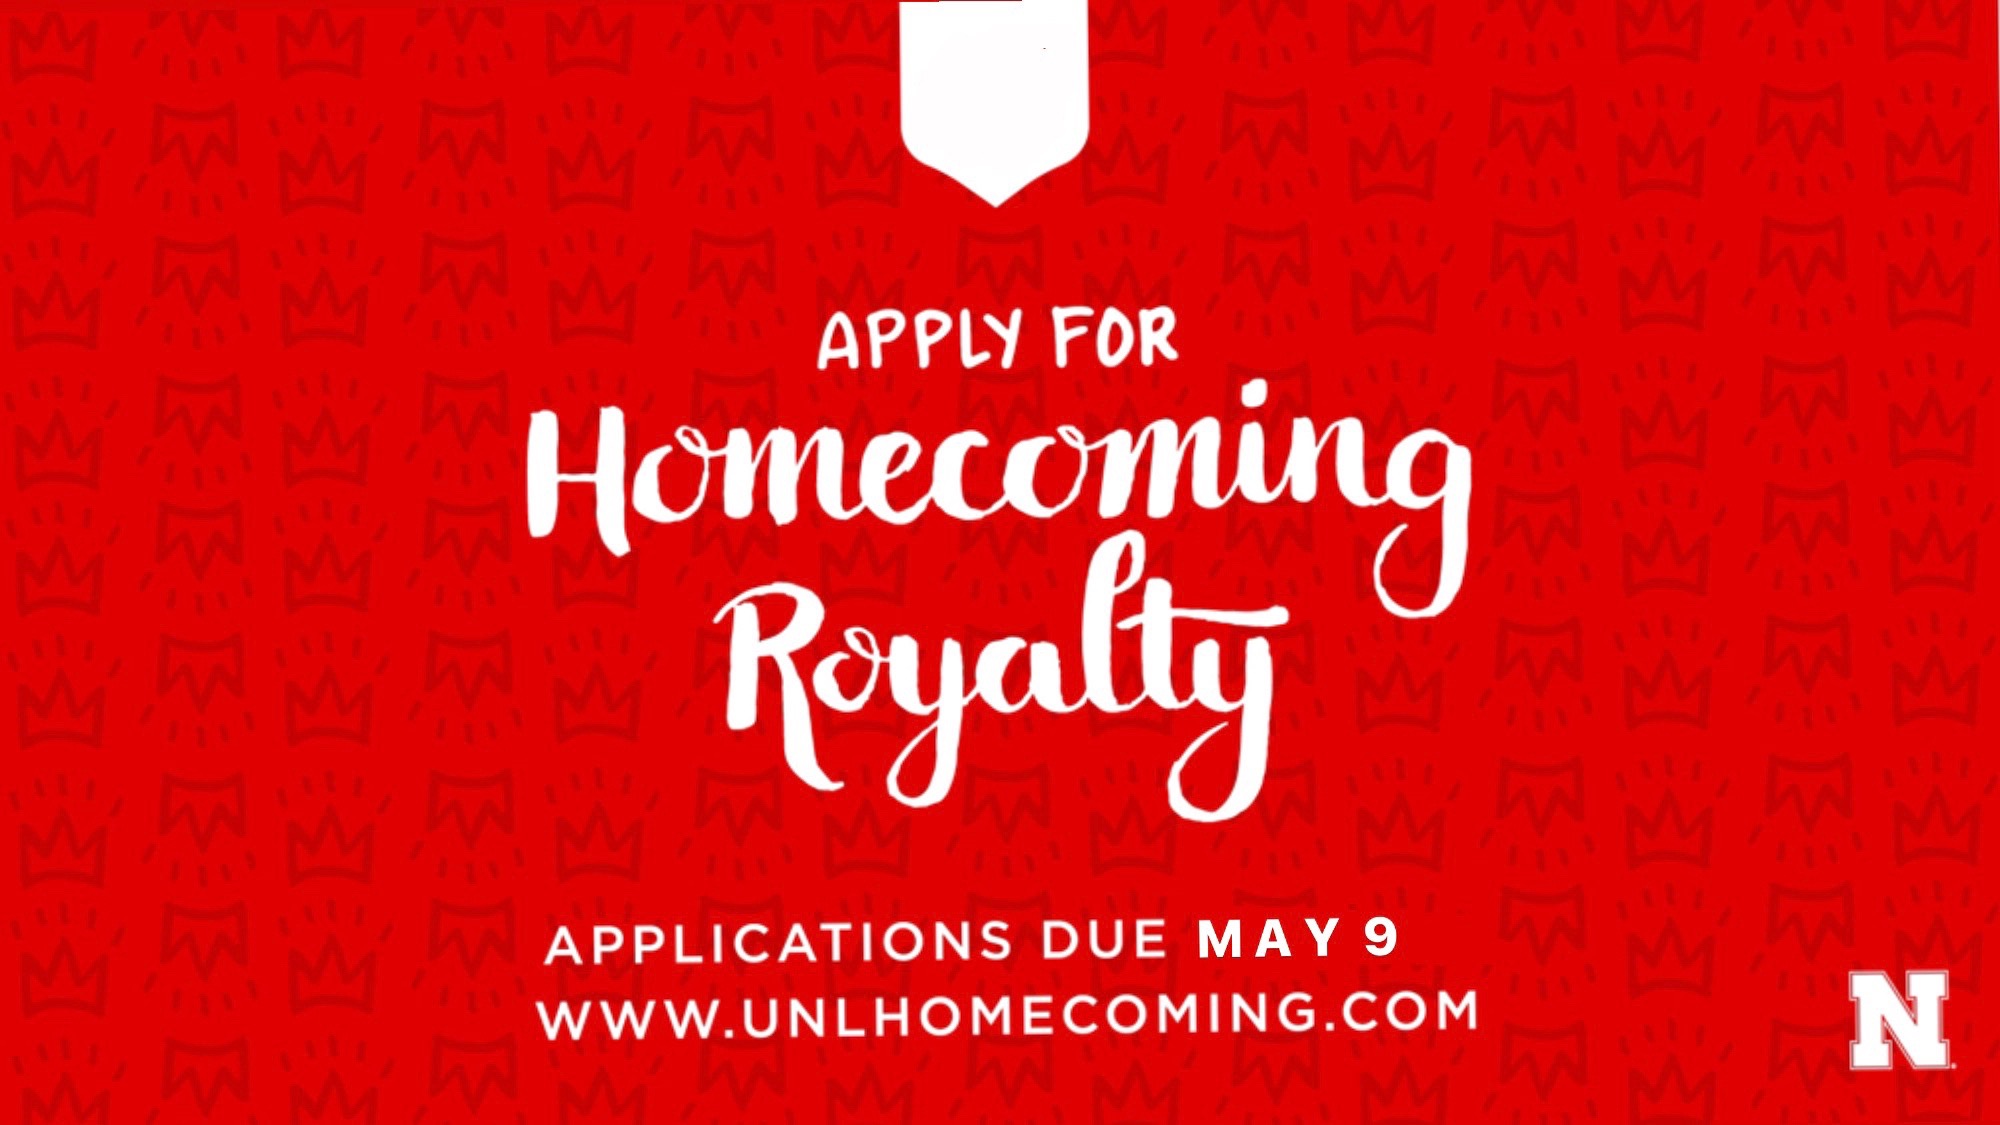 Graphic of homecoming royalty applications